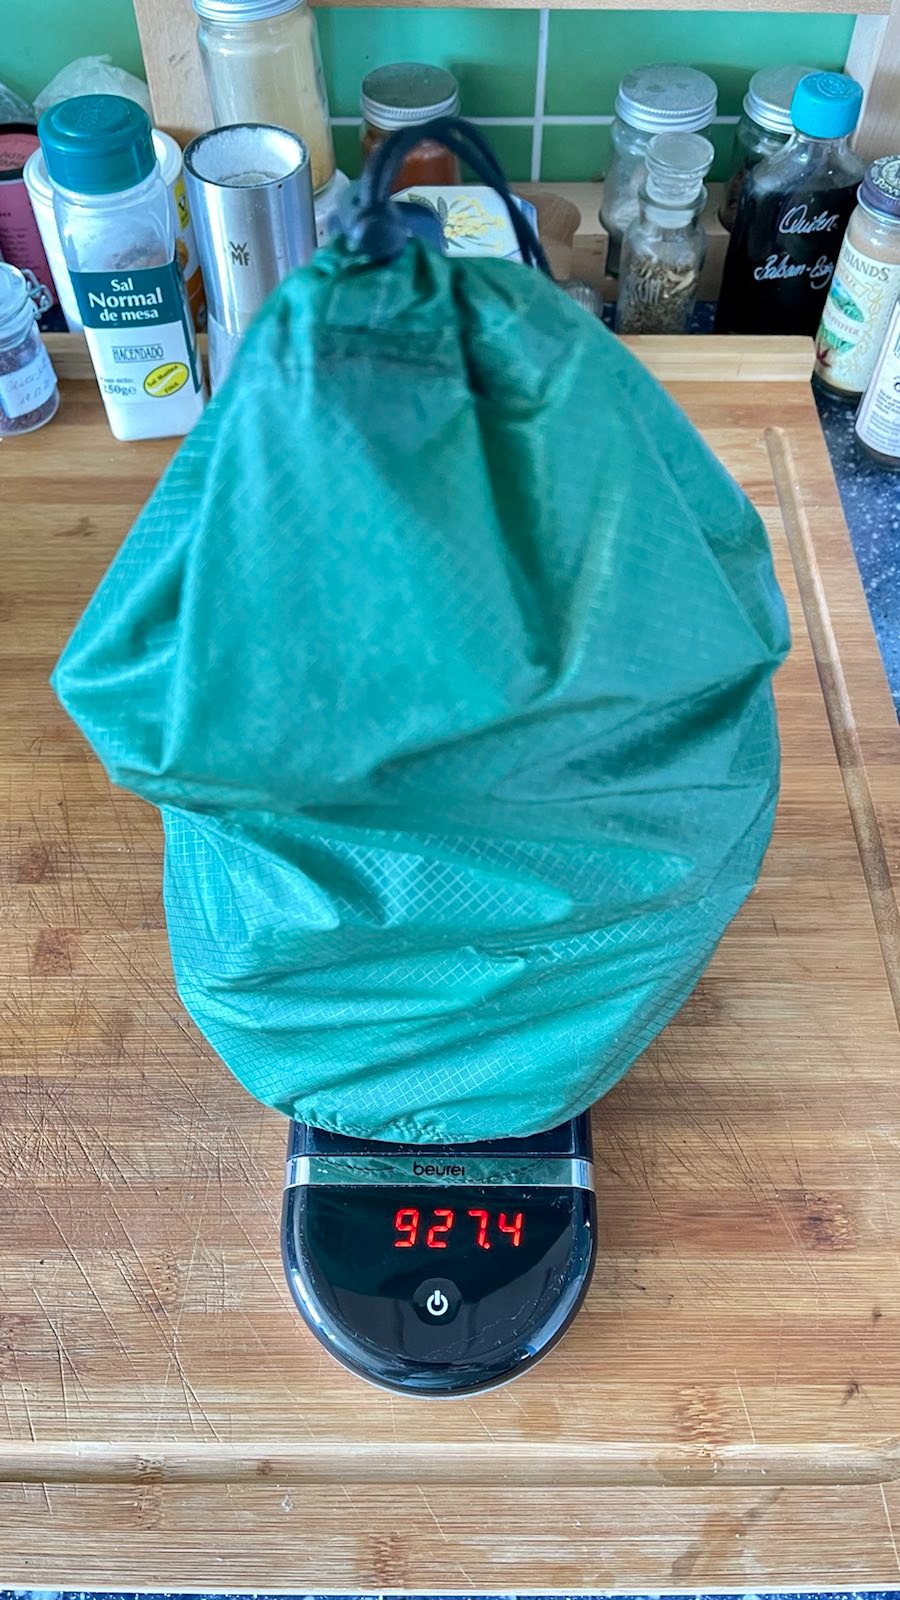 Everything on the scale: under 1000g